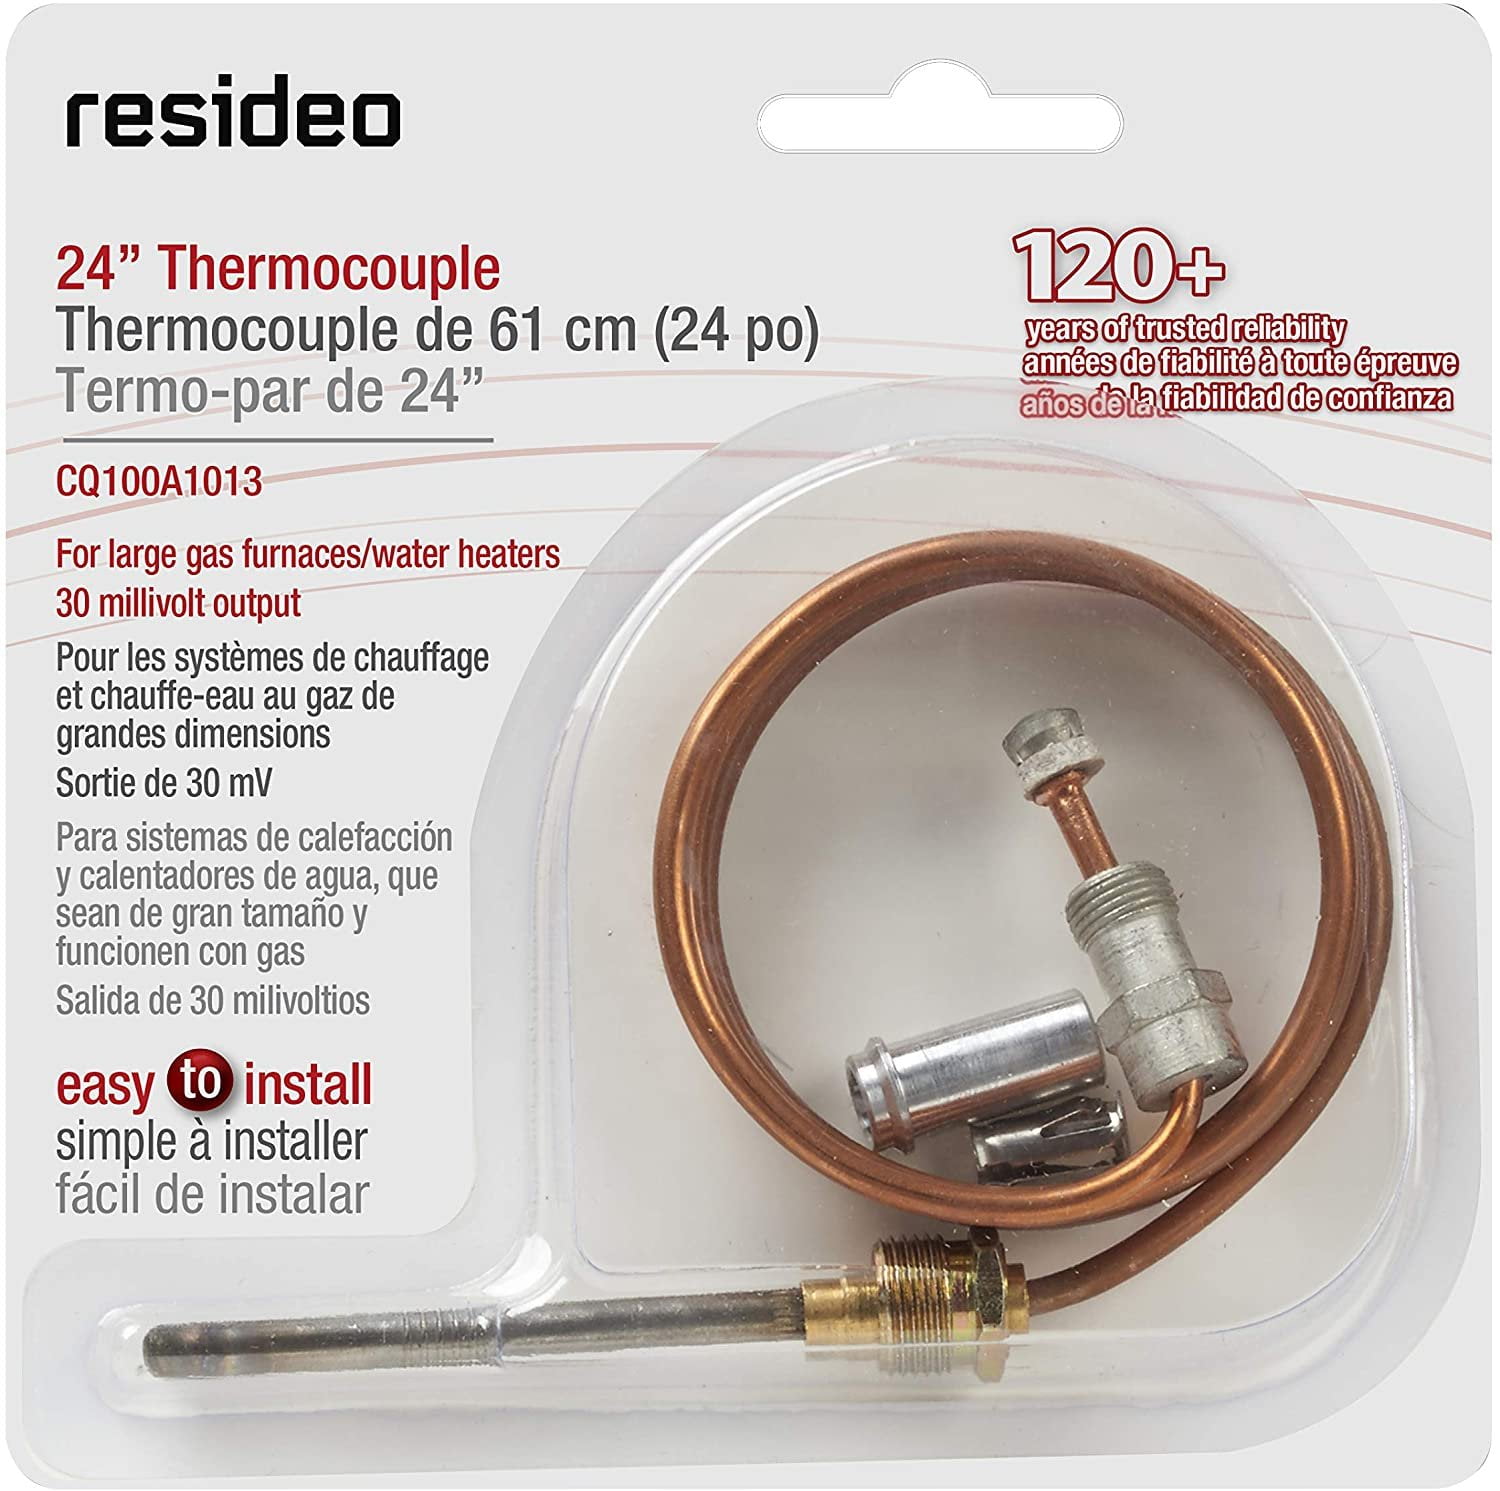 White-Rodgers Emerson TC18 Universal Thermocouple 18-inch for sale online 